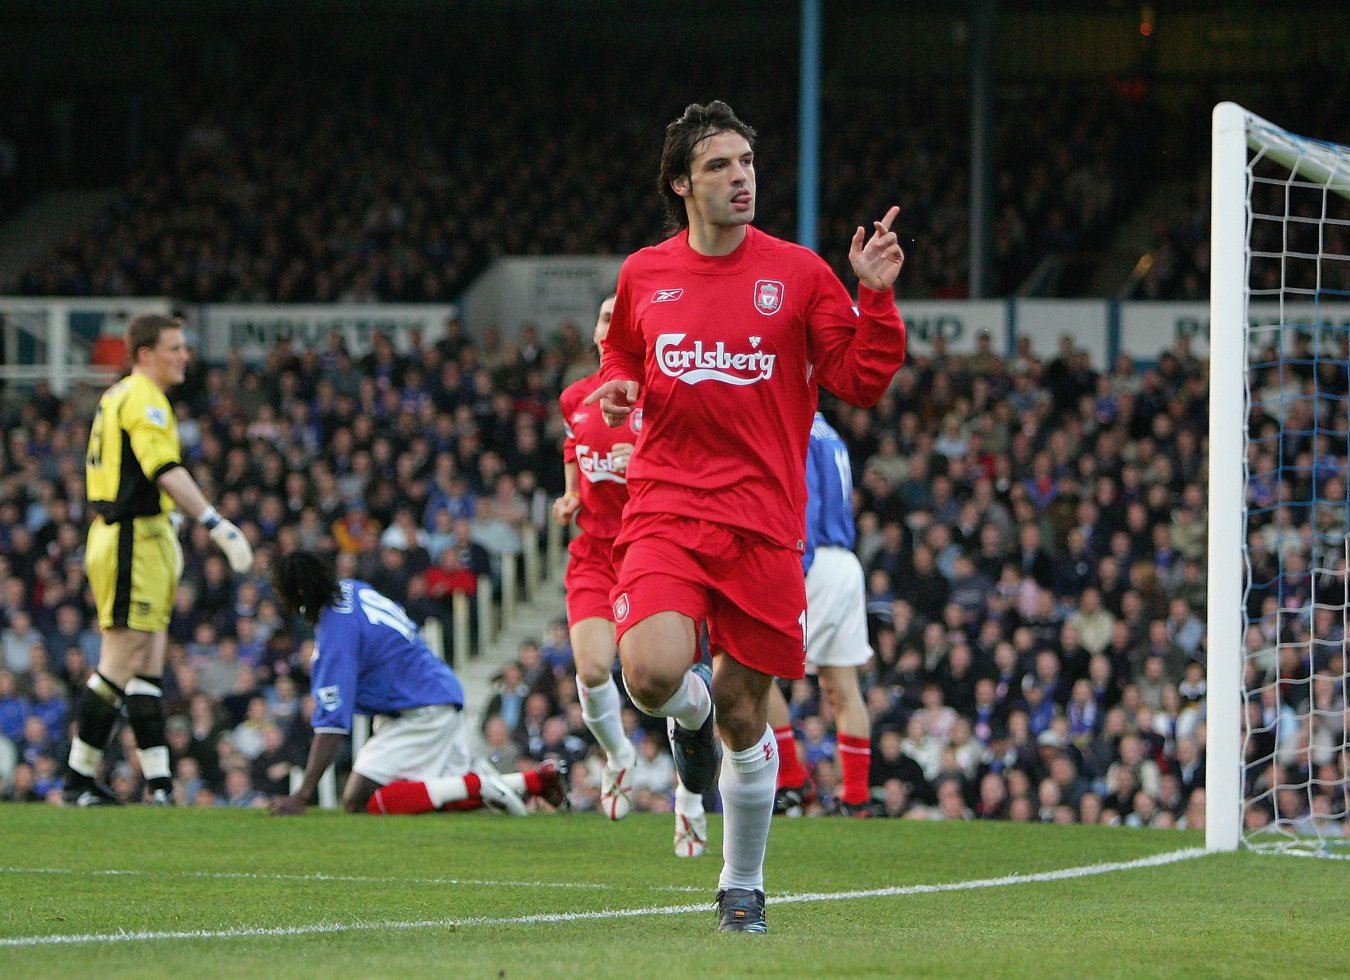 Morientes: “I consider myself part of the Liverpool squad that won the  Champions League” - AS USA